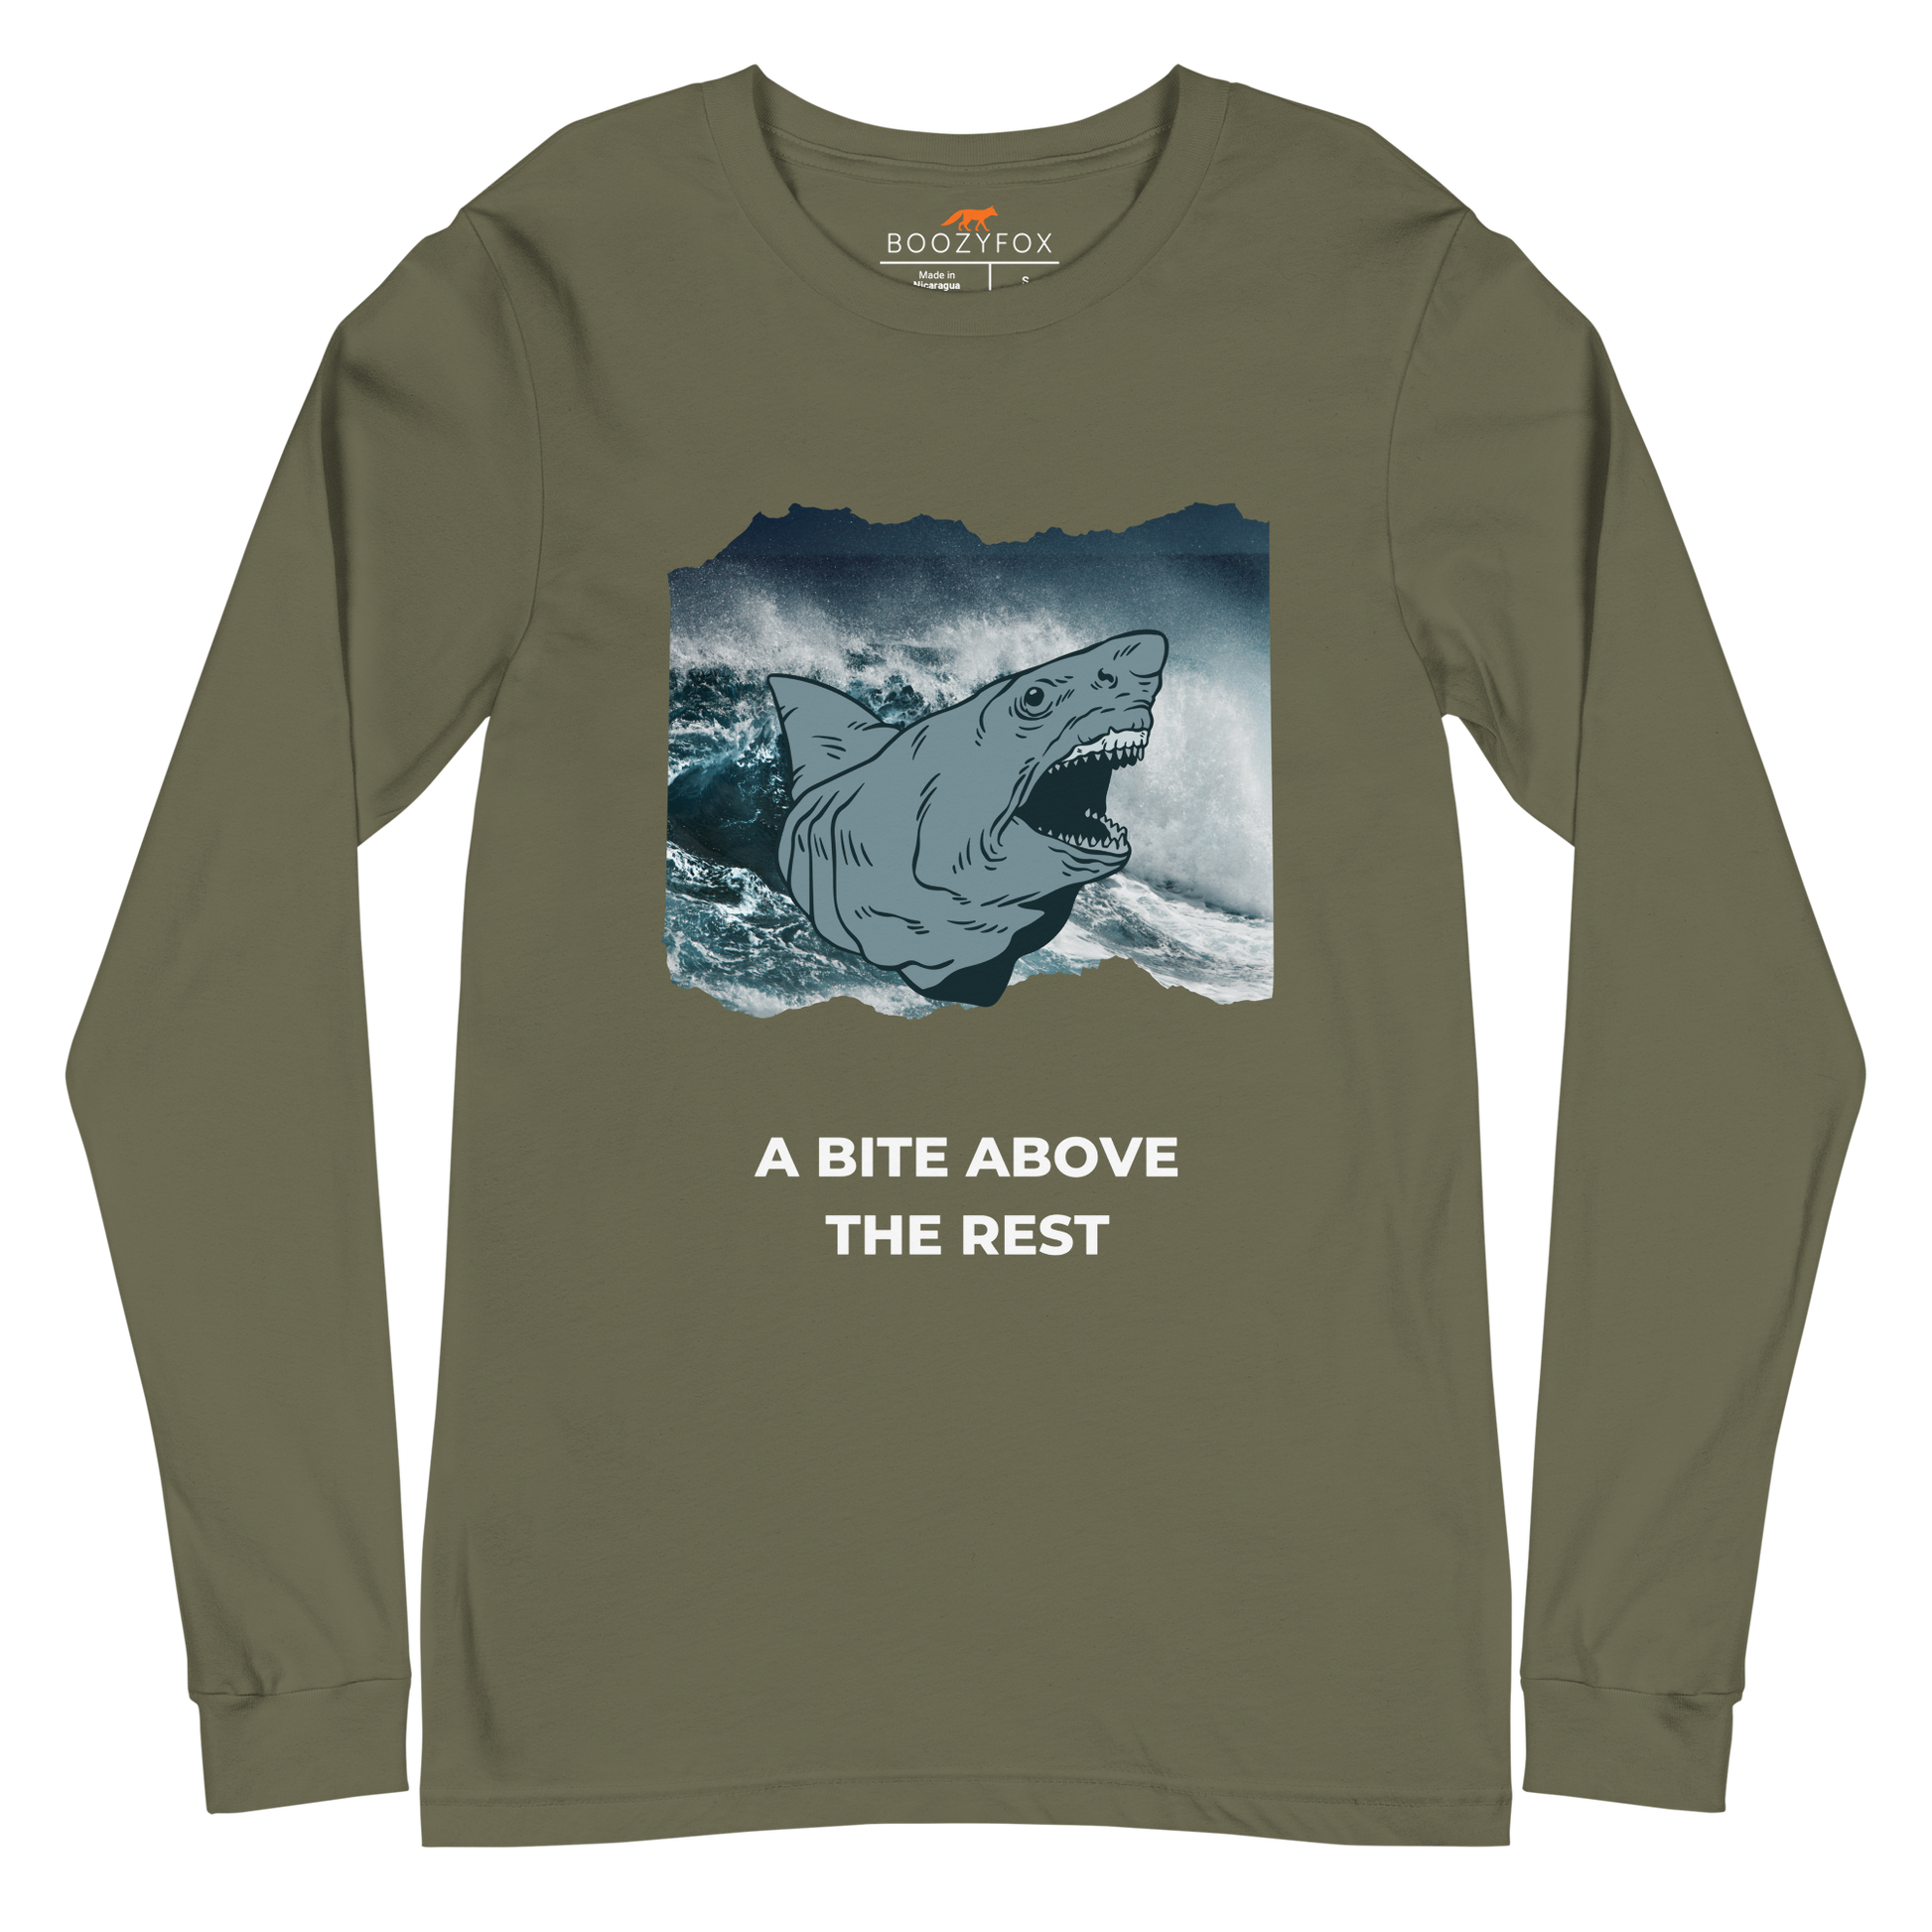 Military Green Megalodon Long Sleeve Tee featuring A Bite Above the Rest graphic on the chest - Funny Megalodon Long Sleeve Graphic Tees - Boozy Fox